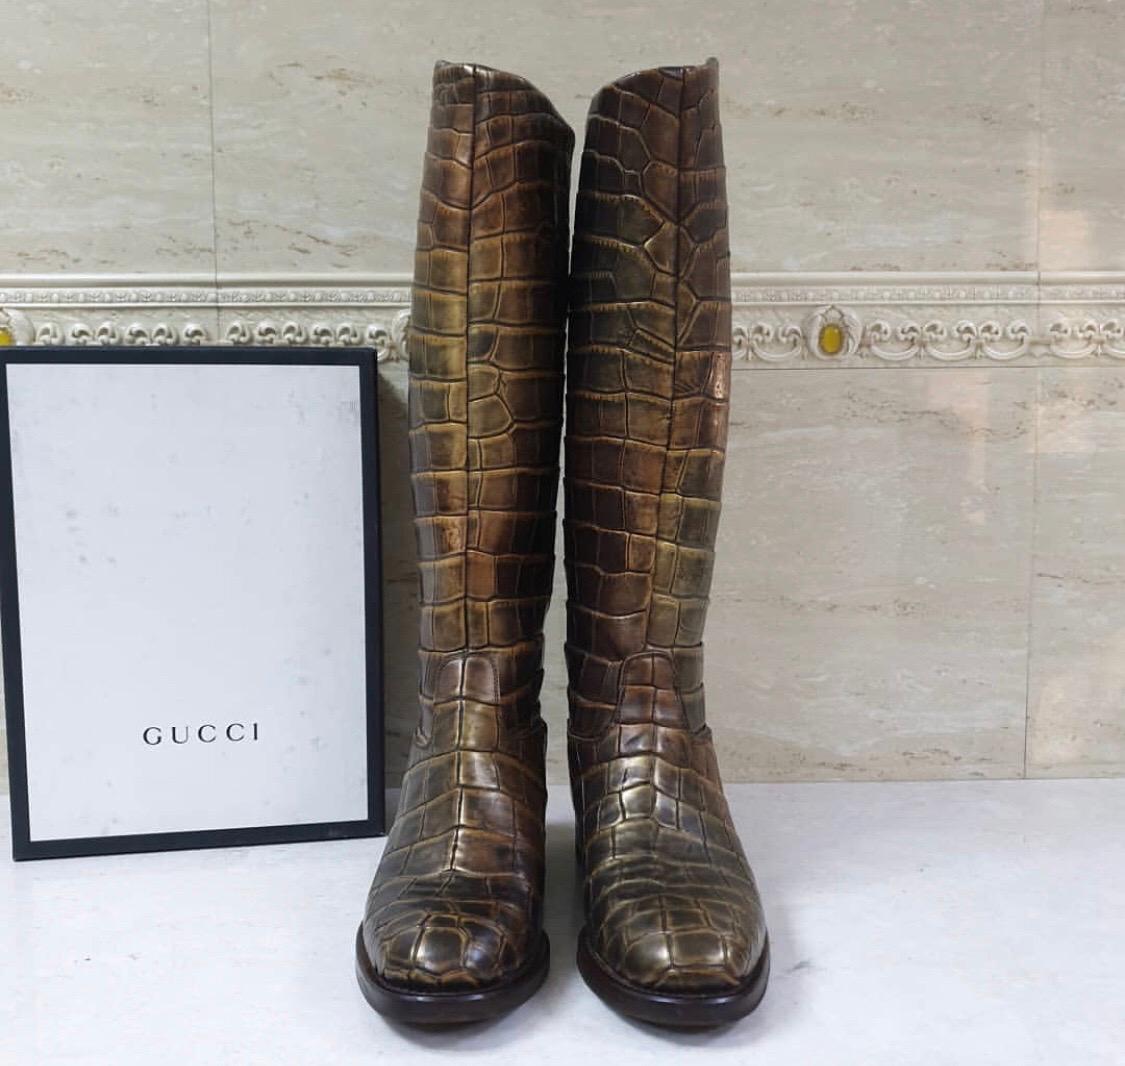 Super Rare Item.
Alligator/Croc Boots 
Retail $17,500+tax 



Pull up style

Sz.40

Made in Italy ????????

serial number inside

In back has Gucci crest logo.

Please know your size in Gucci shoes

Part of Gucci exotic line

Condition is excellent.